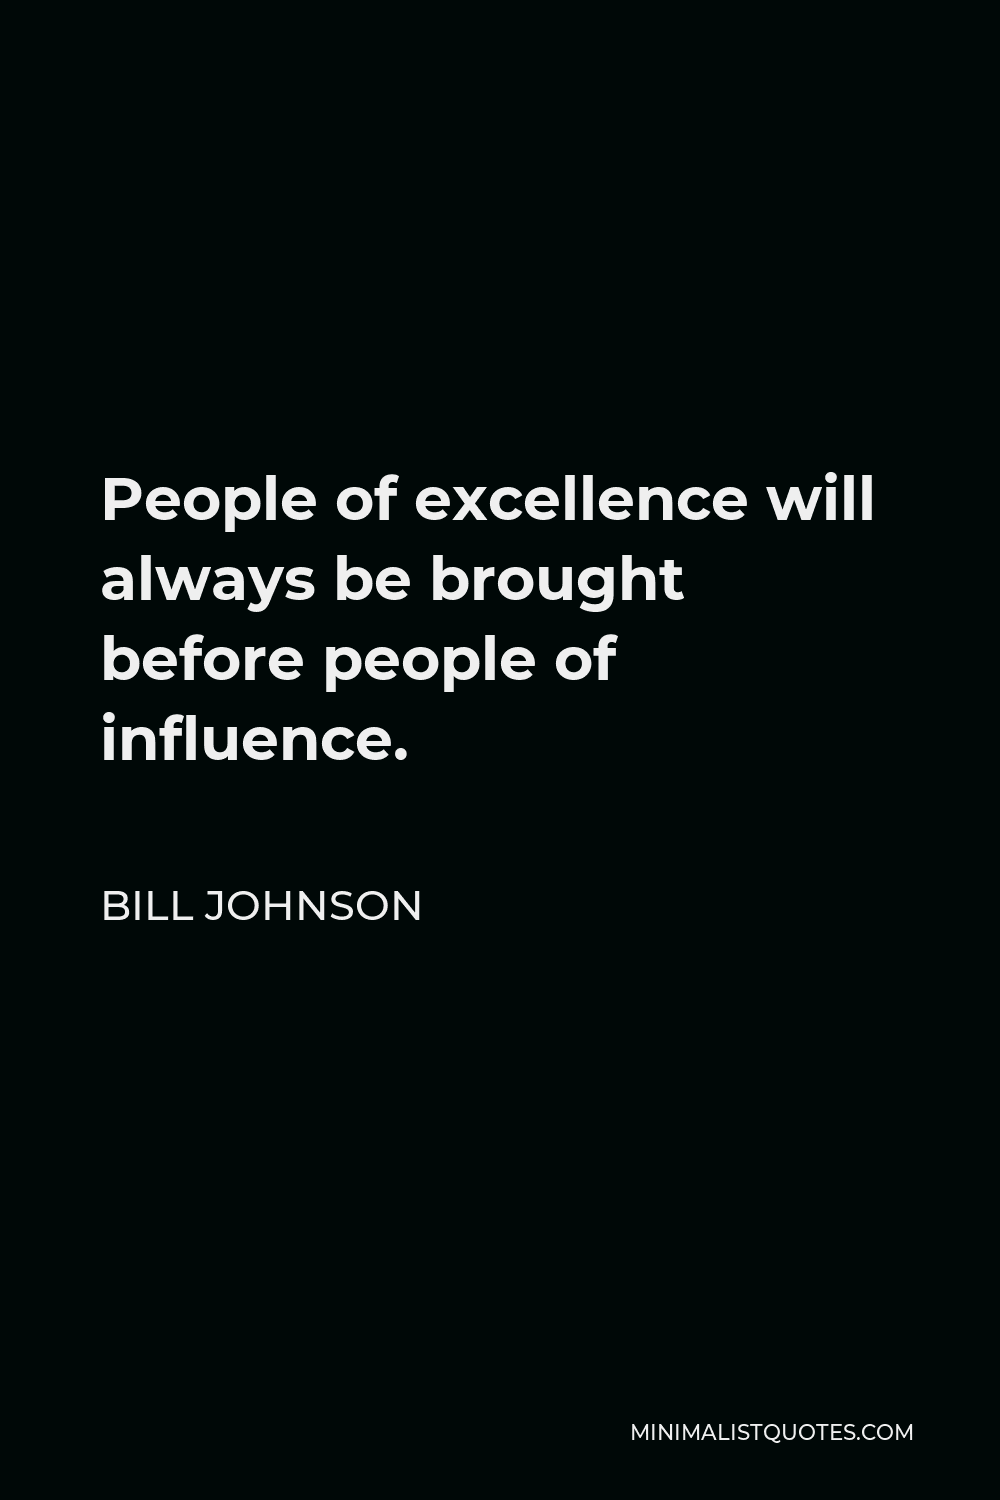 Bill Johnson Quote - People of excellence will always be brought before people of influence.